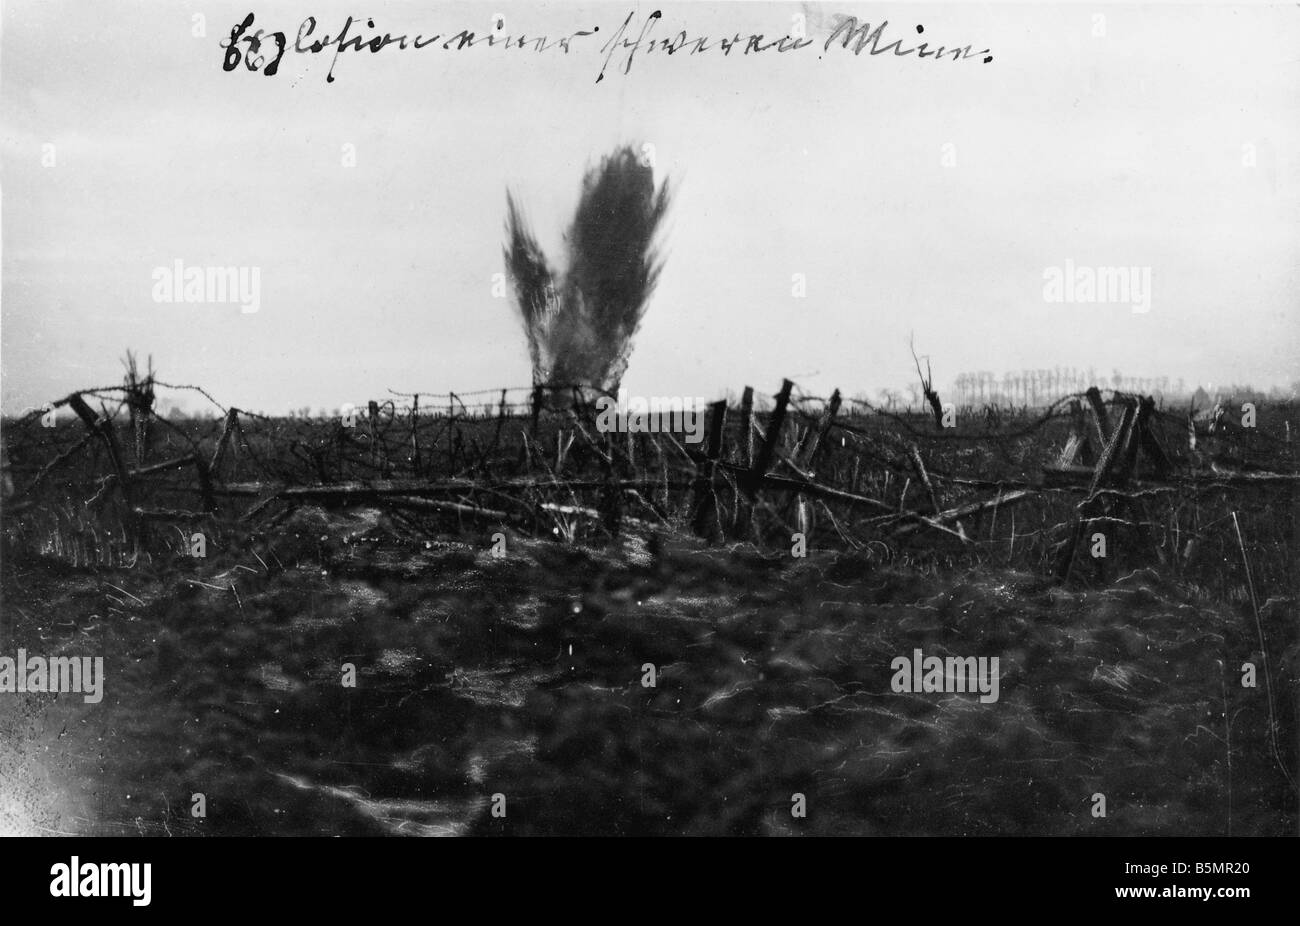 Explosion of a mine on an Eng grave World War 1 Western Front Explosion of a mine on an English grave Photo c 1917 Stock Photo